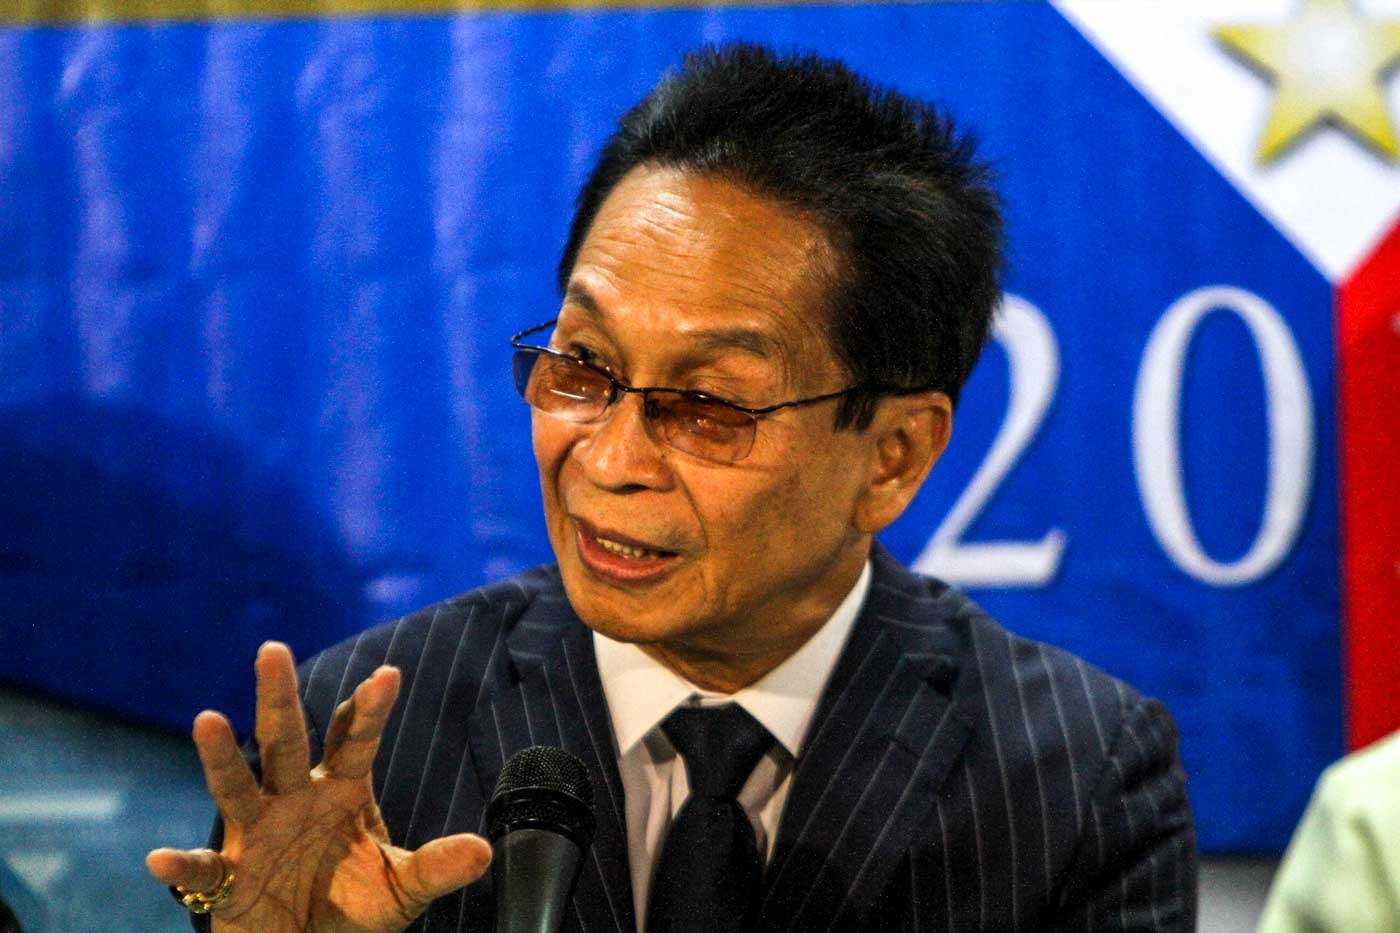 DUTERTE'S SPOKESMAN. Incoming presidential spokesman Salvador Panelo speaks at a press conference on the second day of canvassing of votes for president and vice president on May 26, 2016. Photo by Ben Nabong/Rappler  